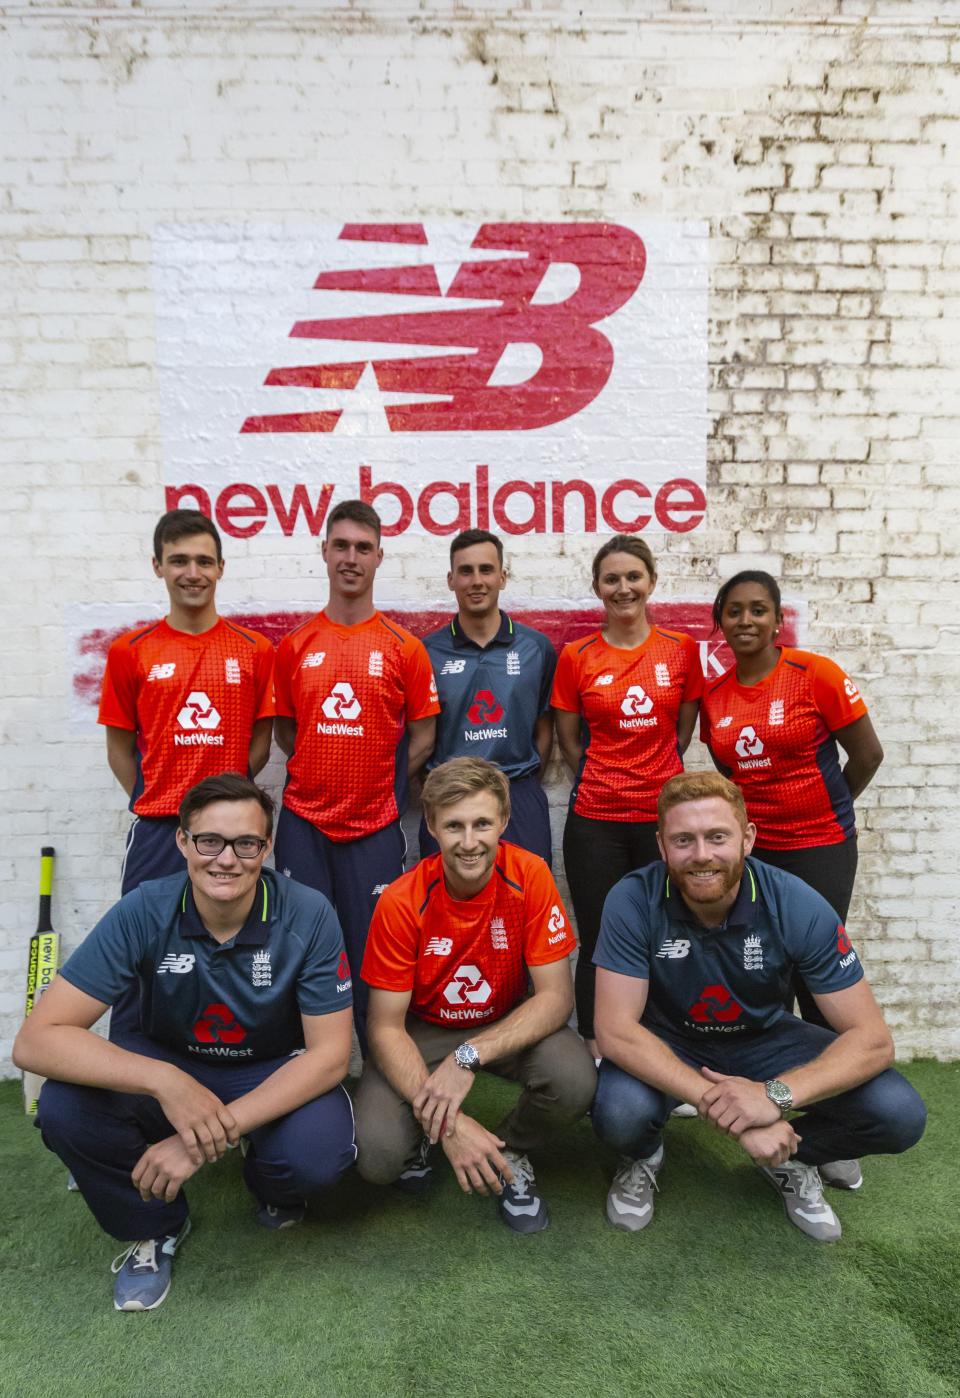 England launch their new ODI and T20 kits, created by New Balance